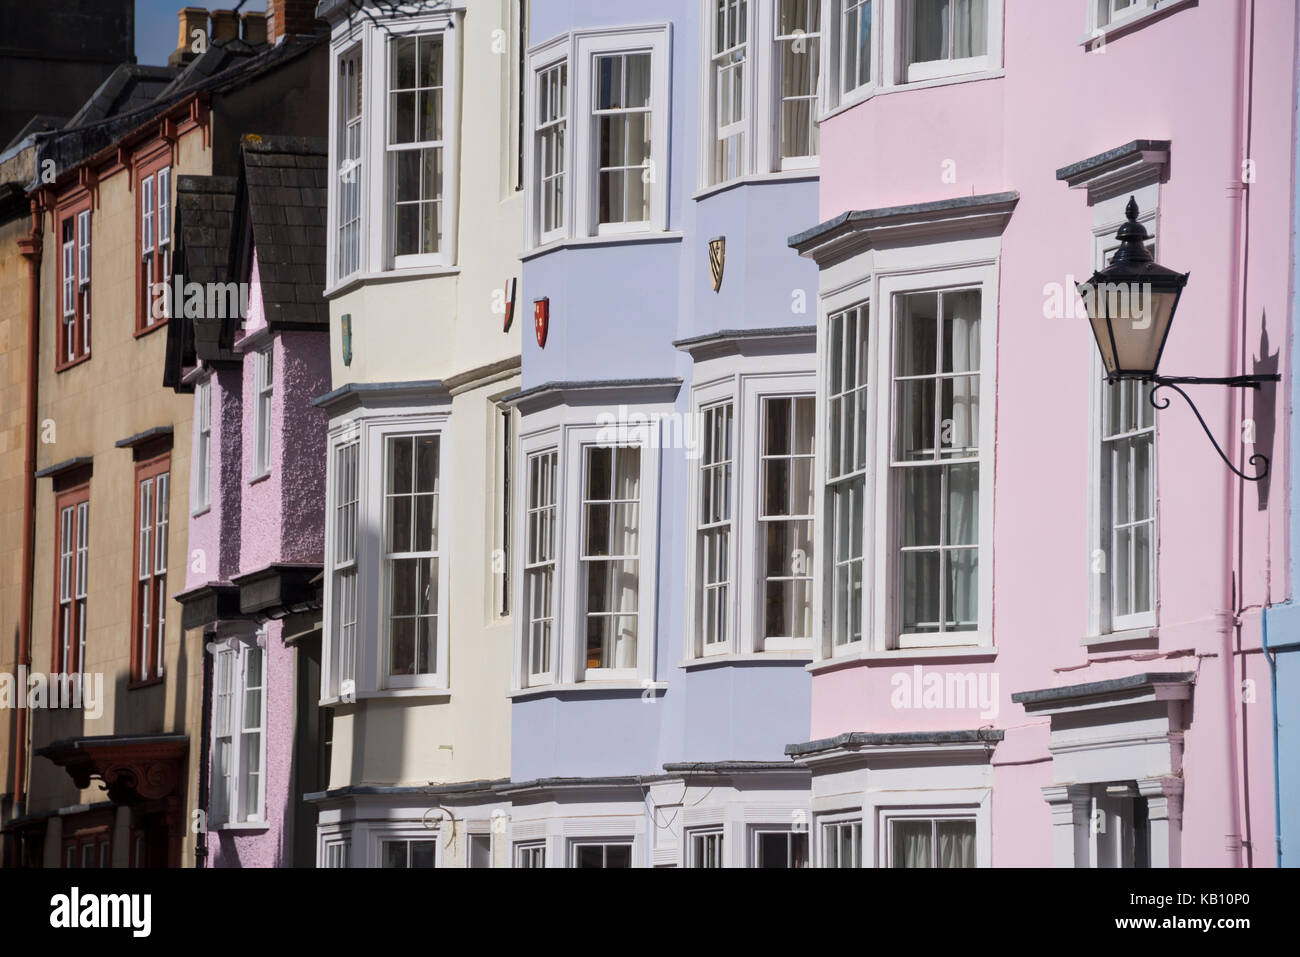 Colourful buildings on Holywell Street, Oxford, UK Stock Photo